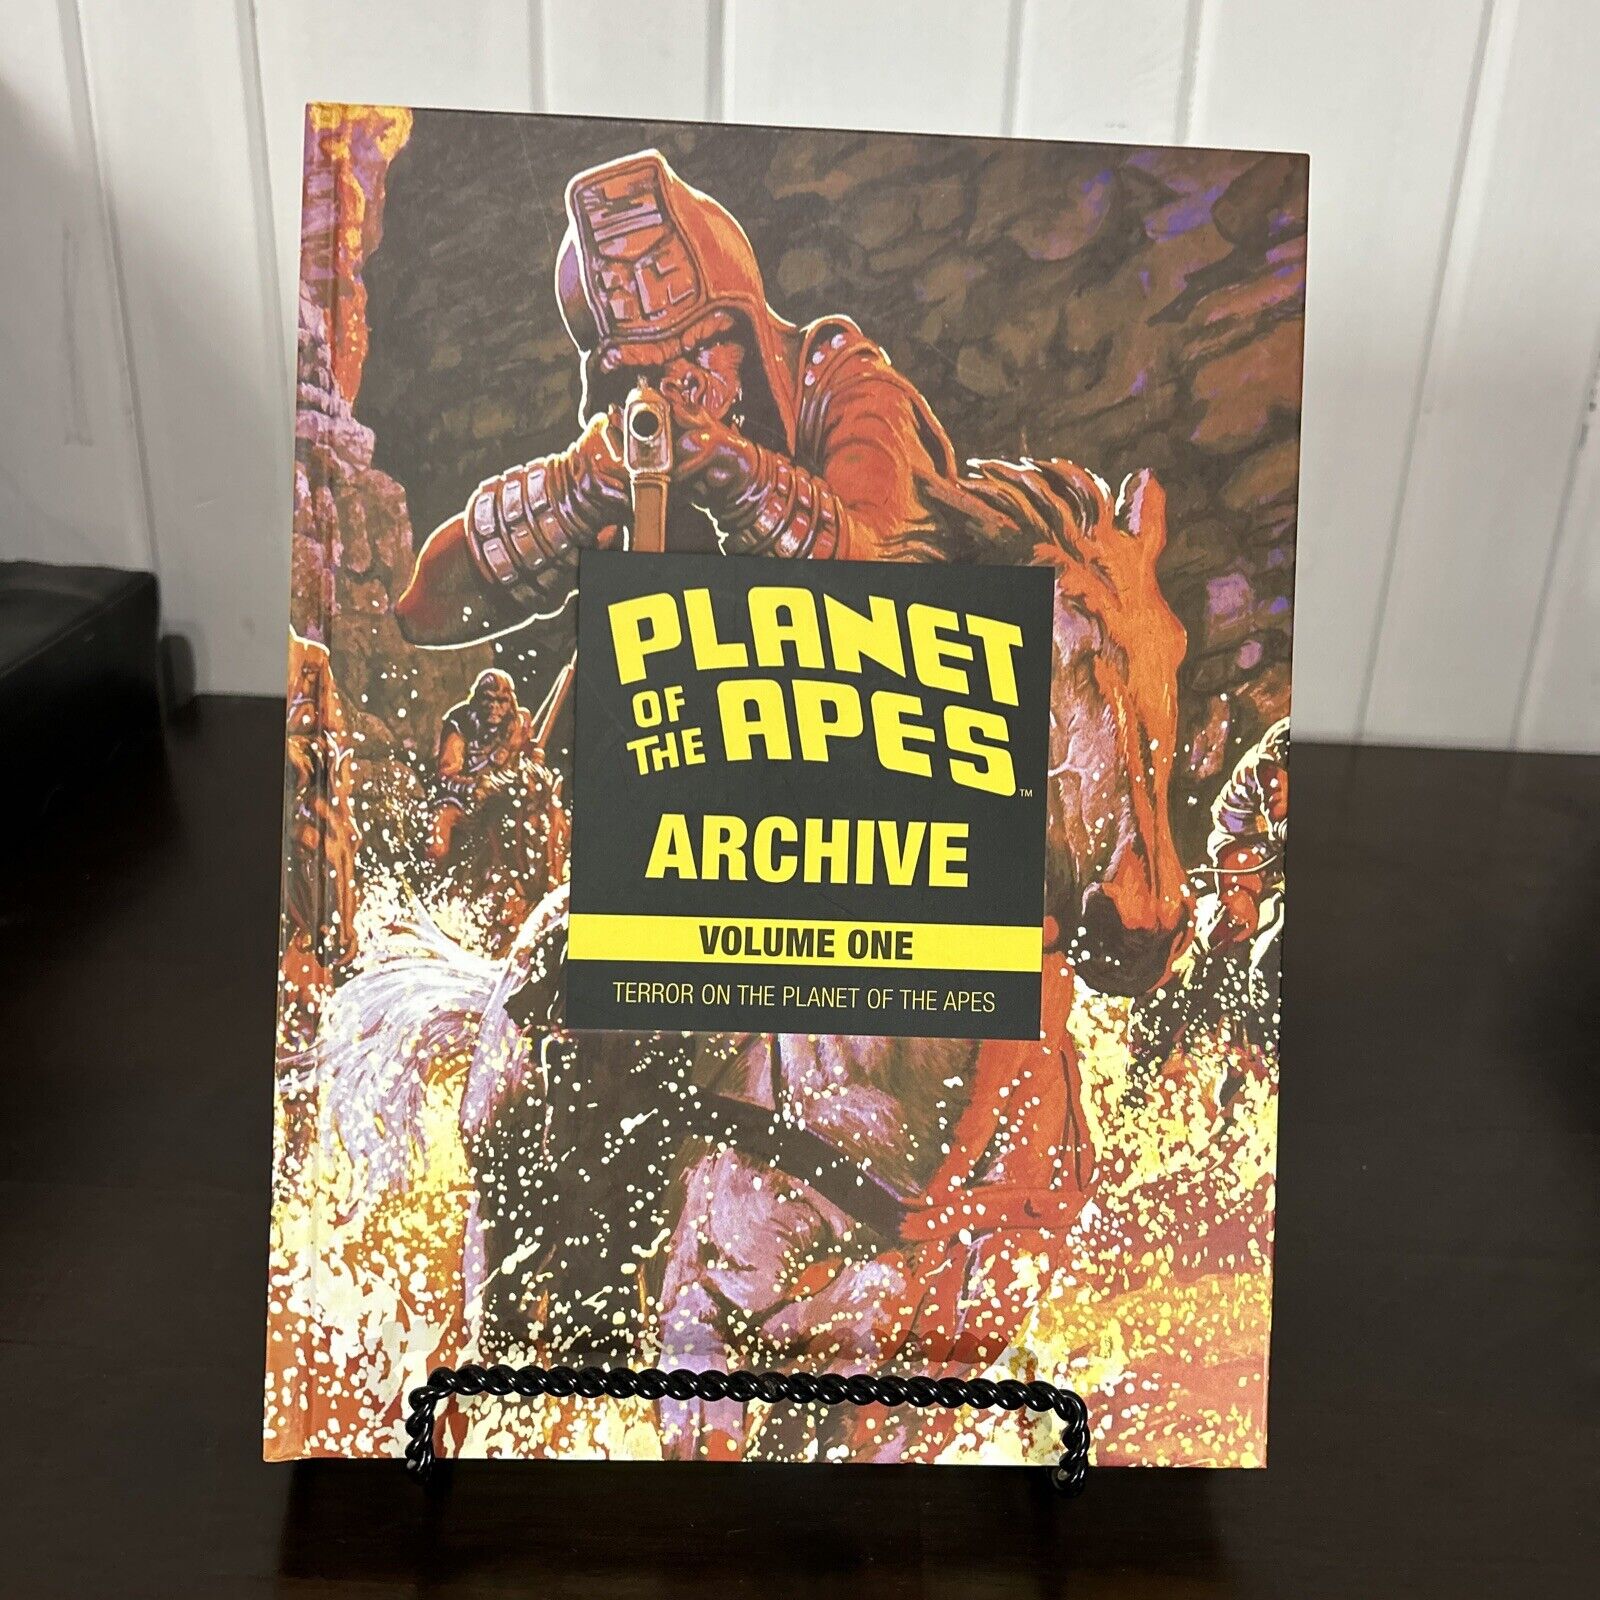 Planet of the Apes Archive Vol. 1: Terror on the Planet of the Apes [1]